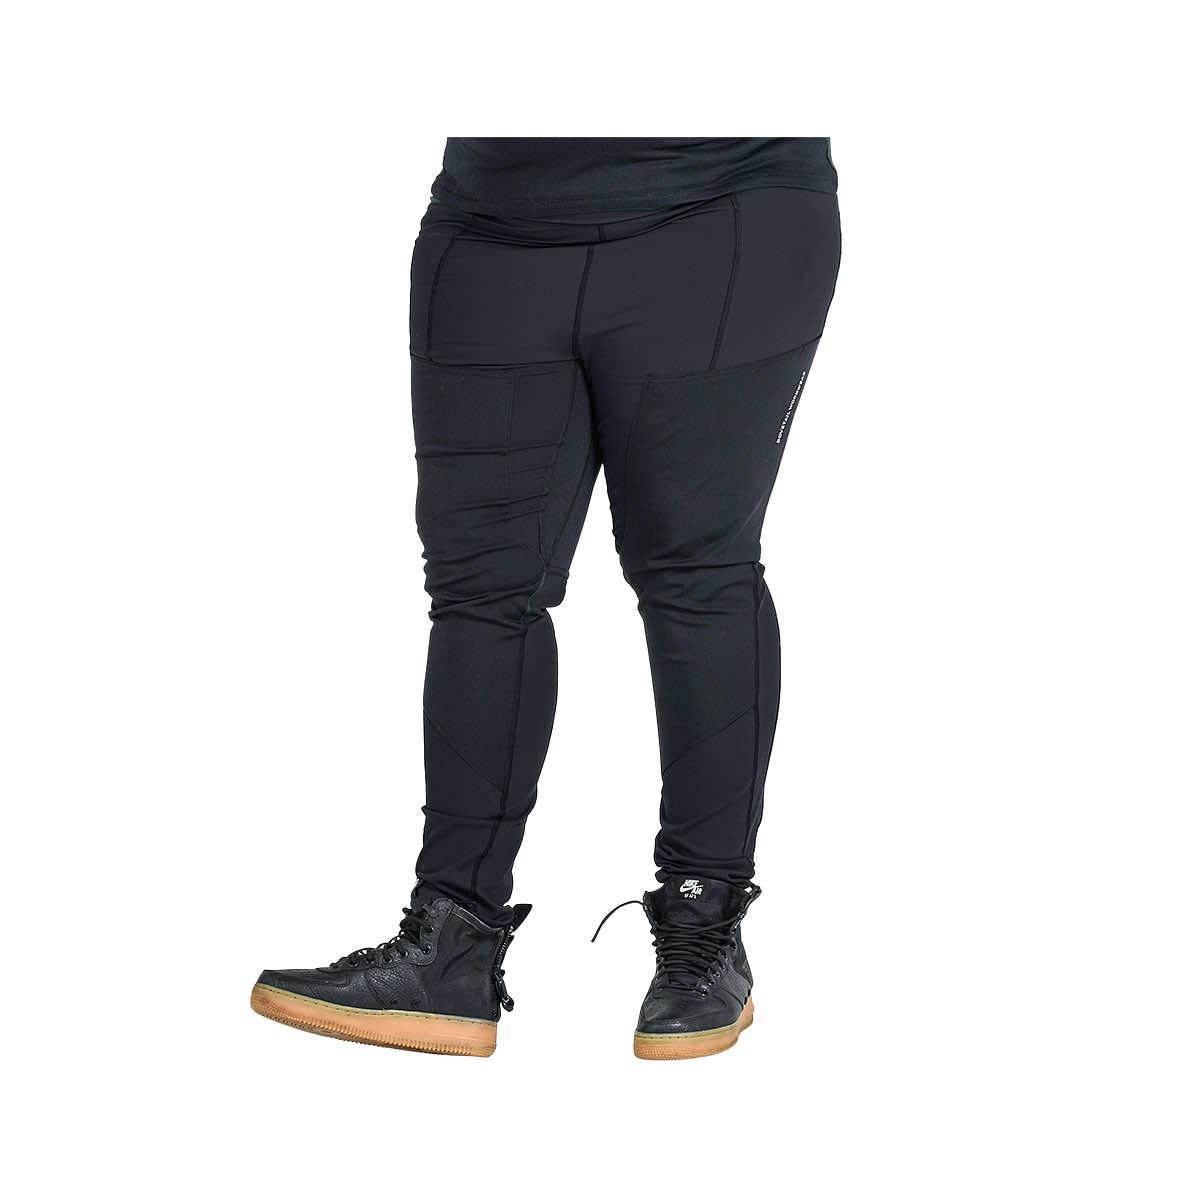 WOMEN'S CARHARTT FORCE FITTED MIDWEIGHT BLACK UTILITY LEGGING- Size 2x